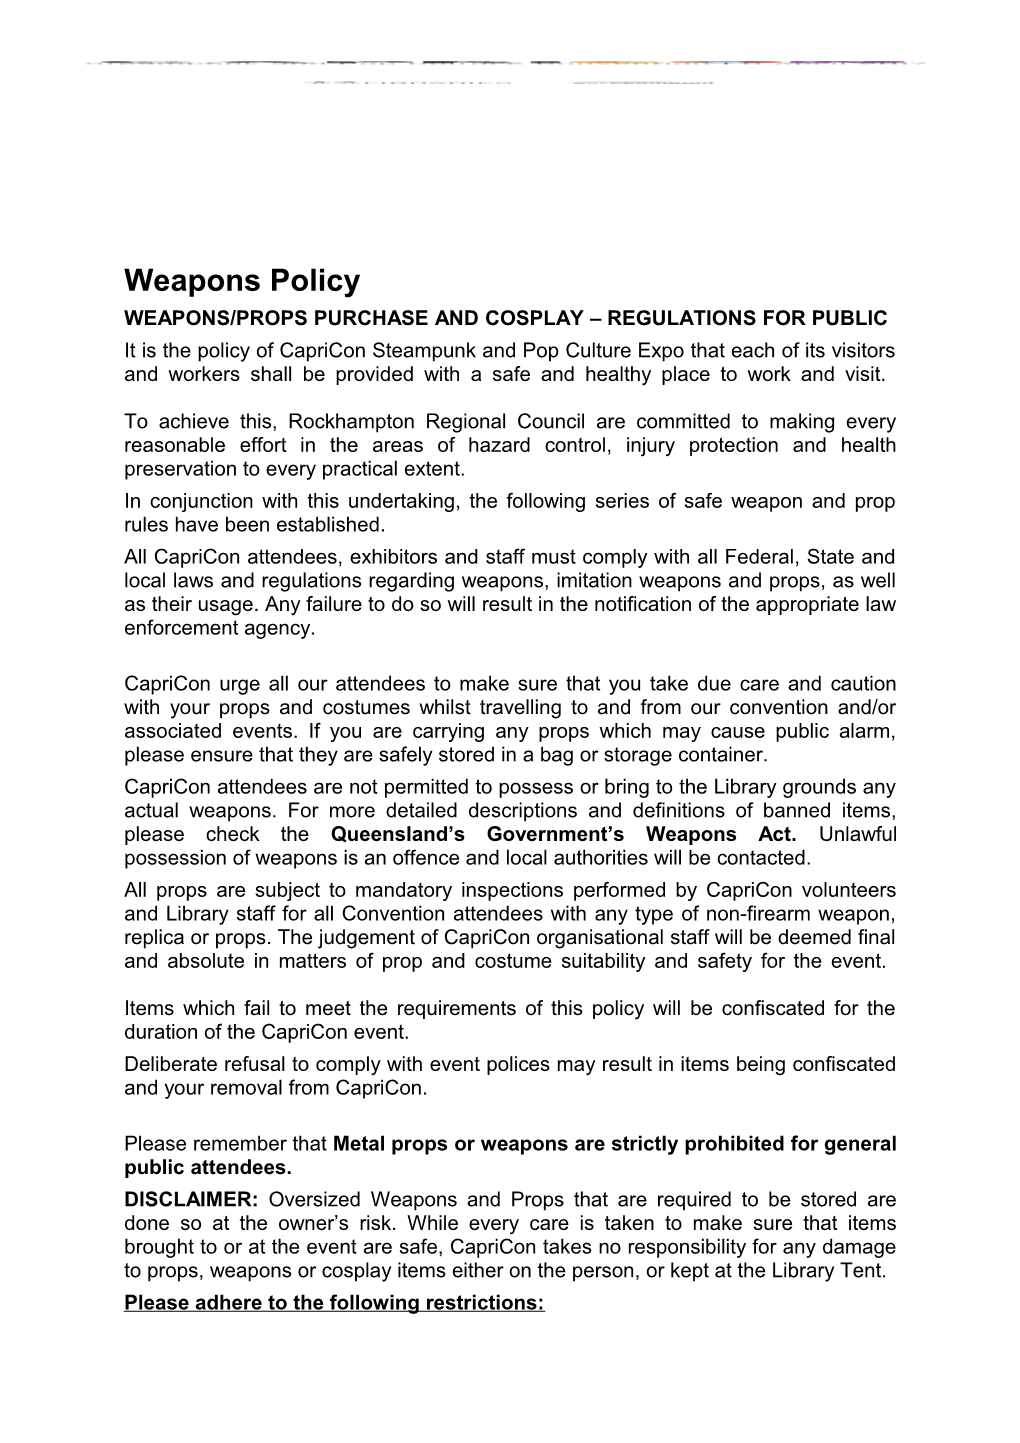 Weapons/Props Purchase and Cosplay Regulations for Public